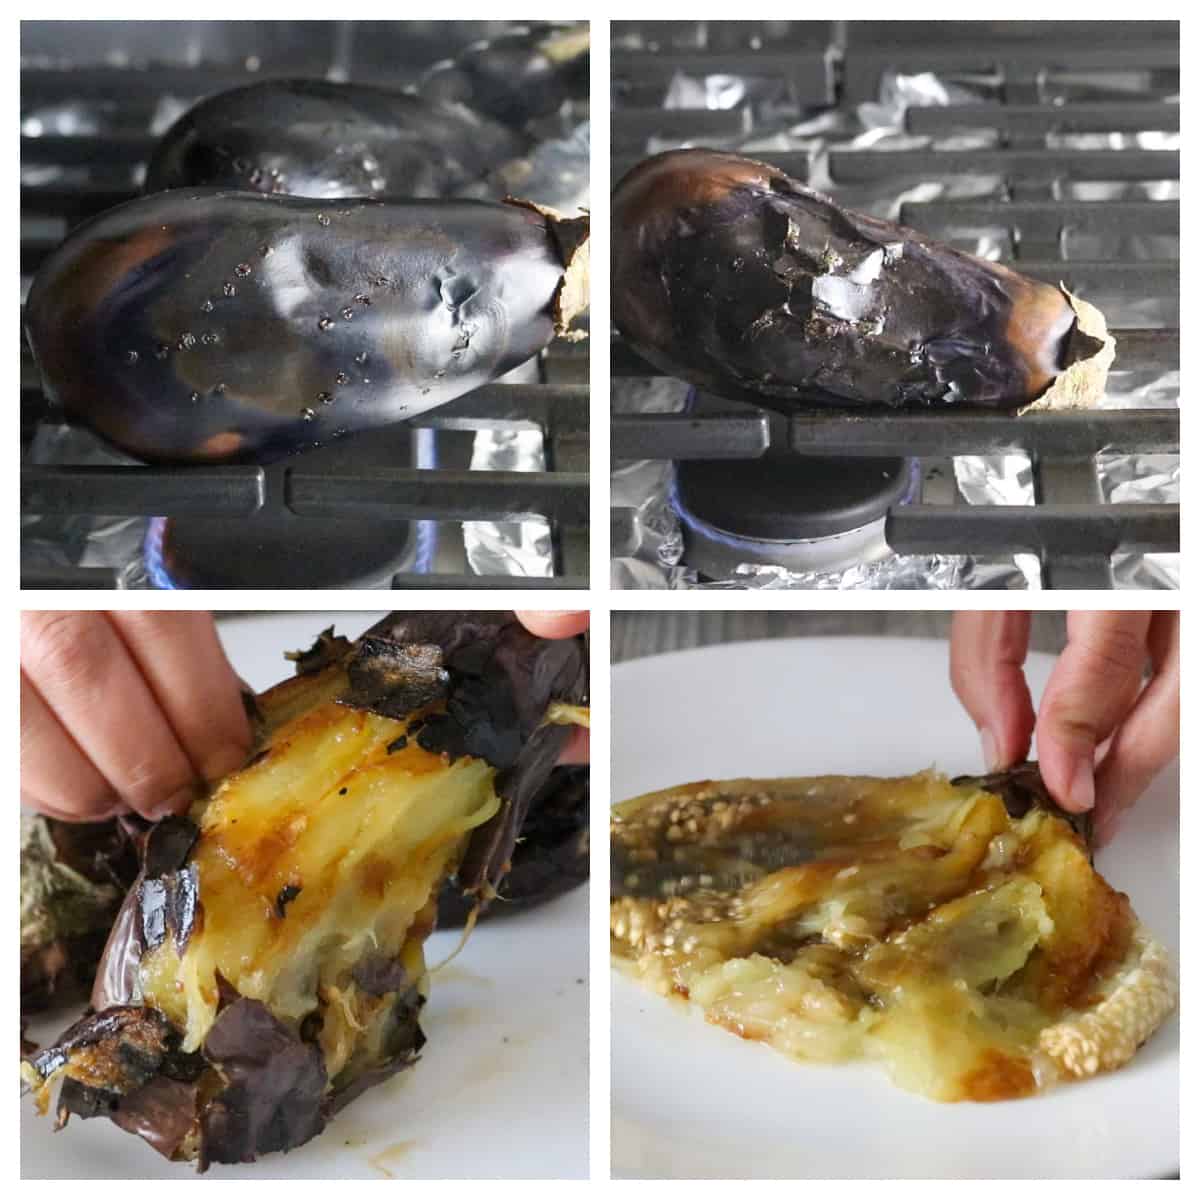 A collage showing the process of grilling the eggplants on a gas stove.